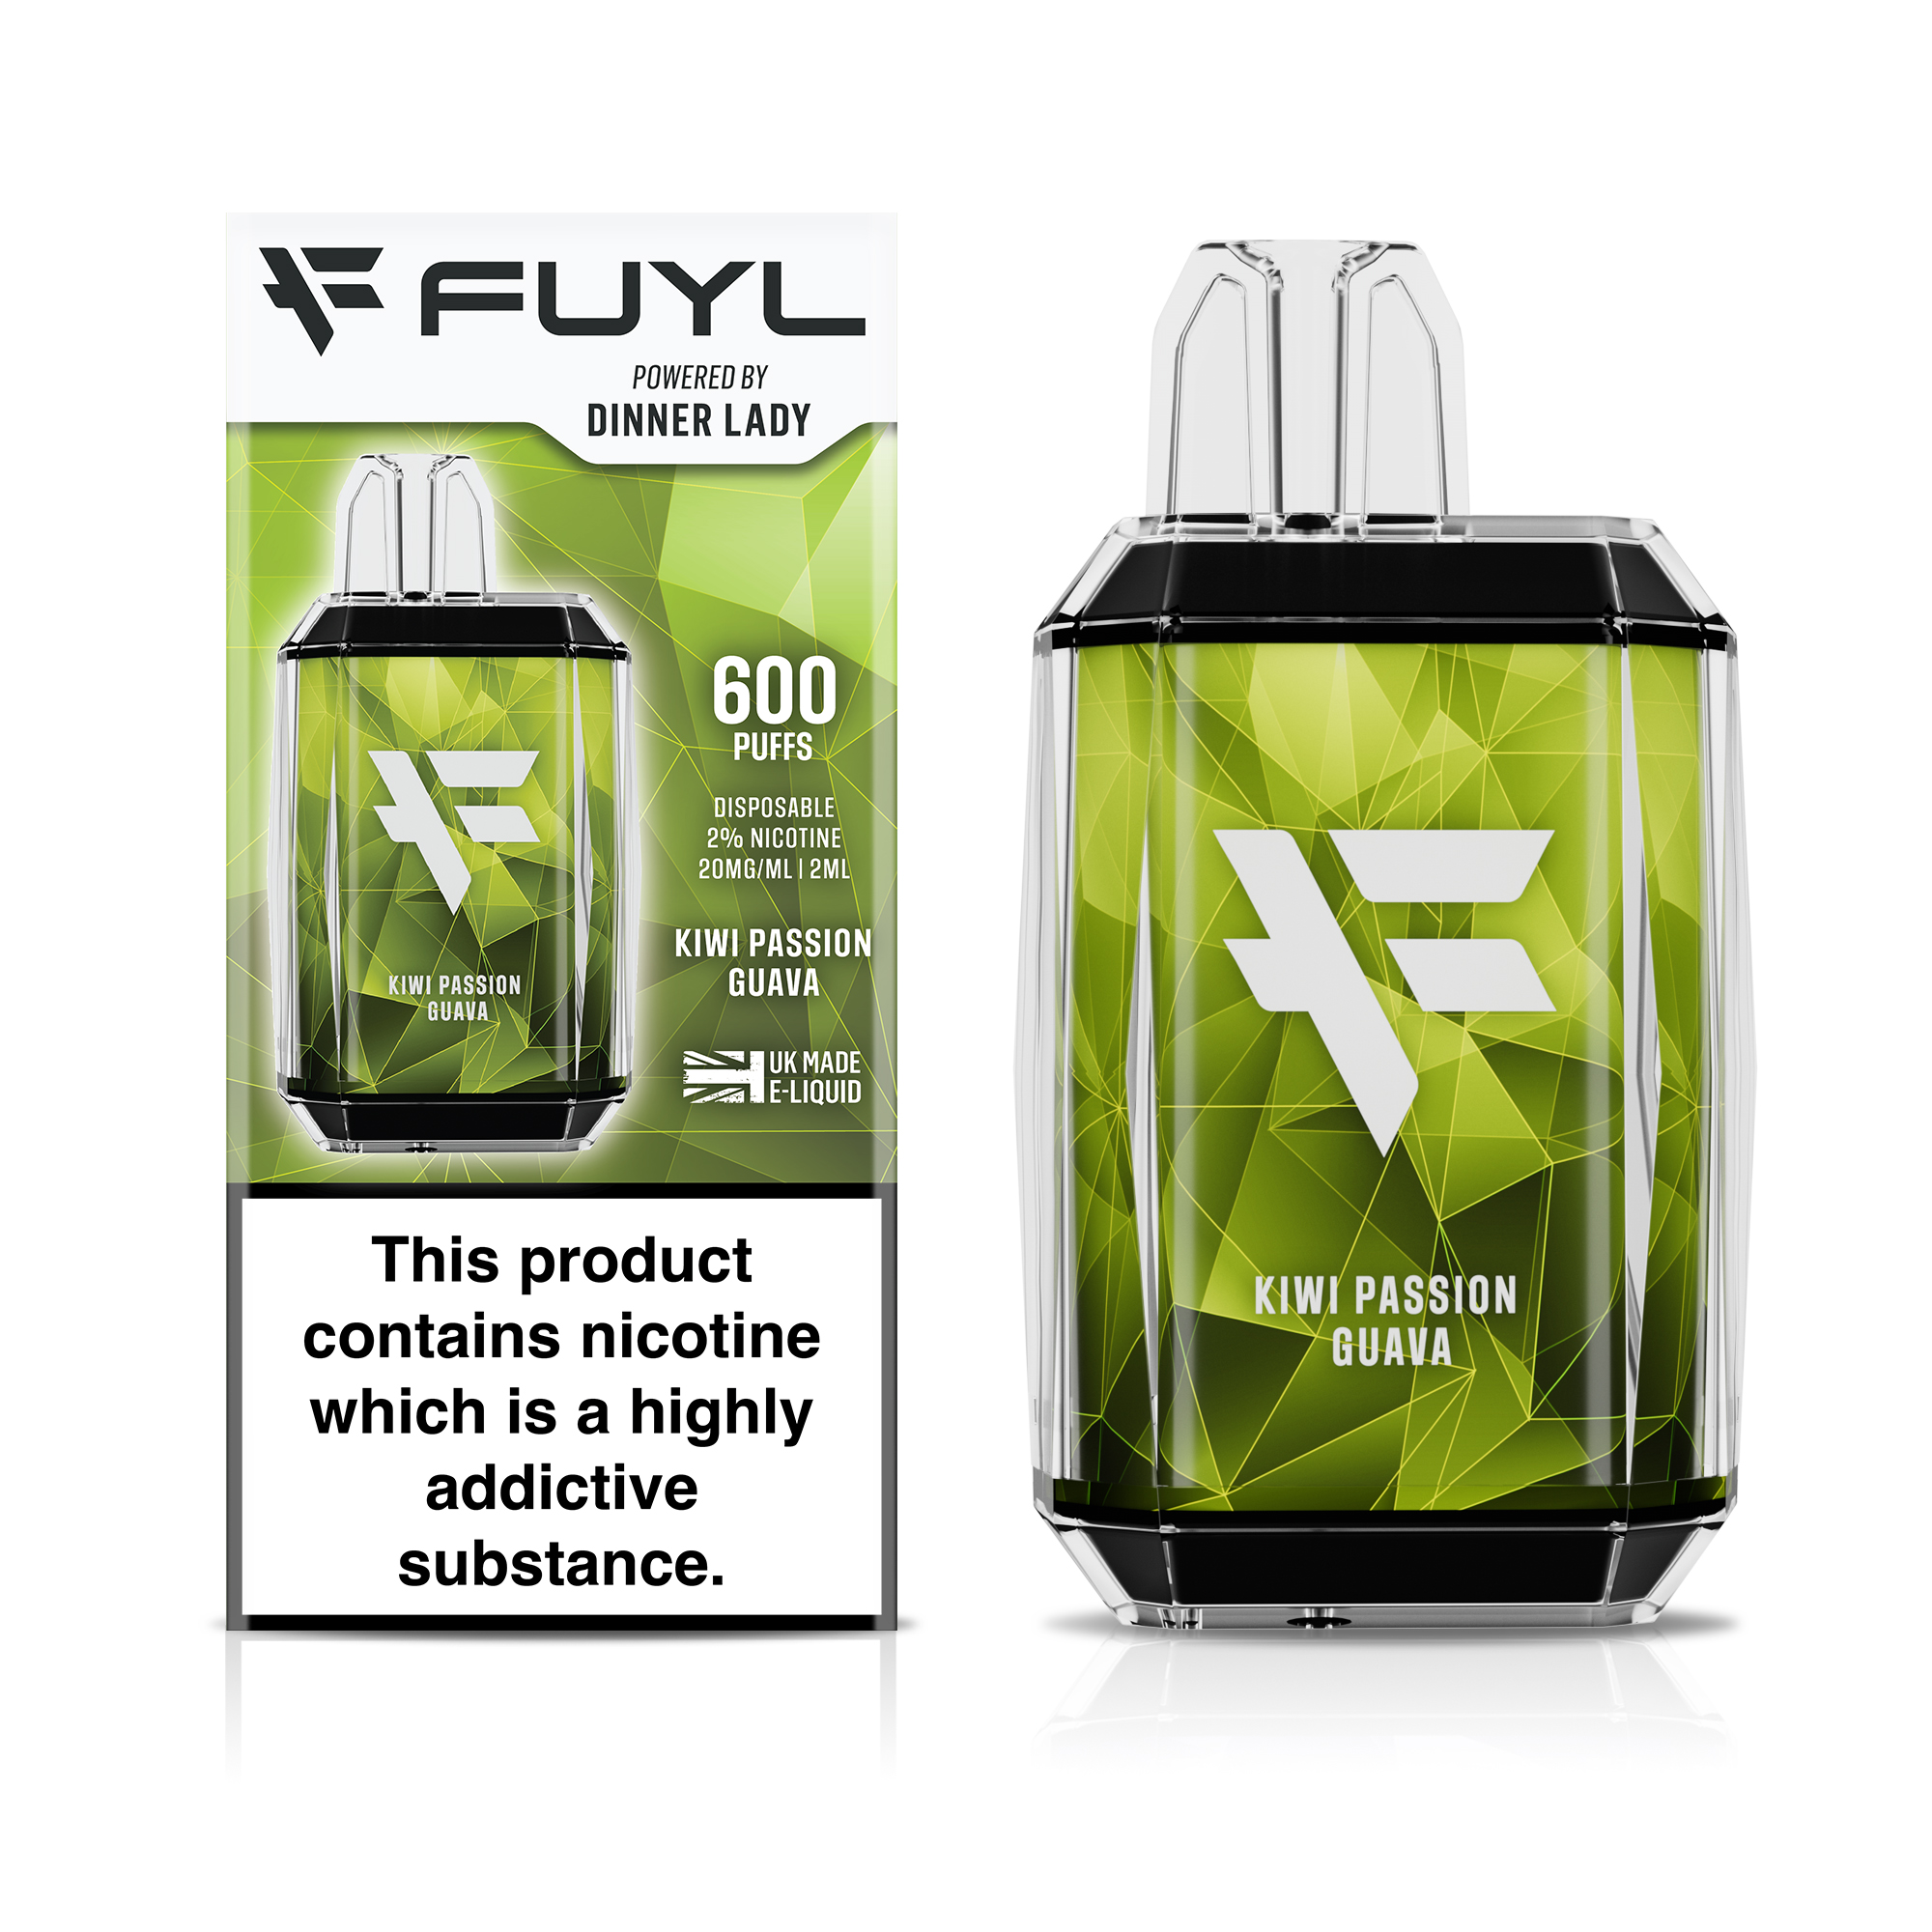 Kiwi Passion Guava by Fuyl Dinner Lady 600puff Disposable